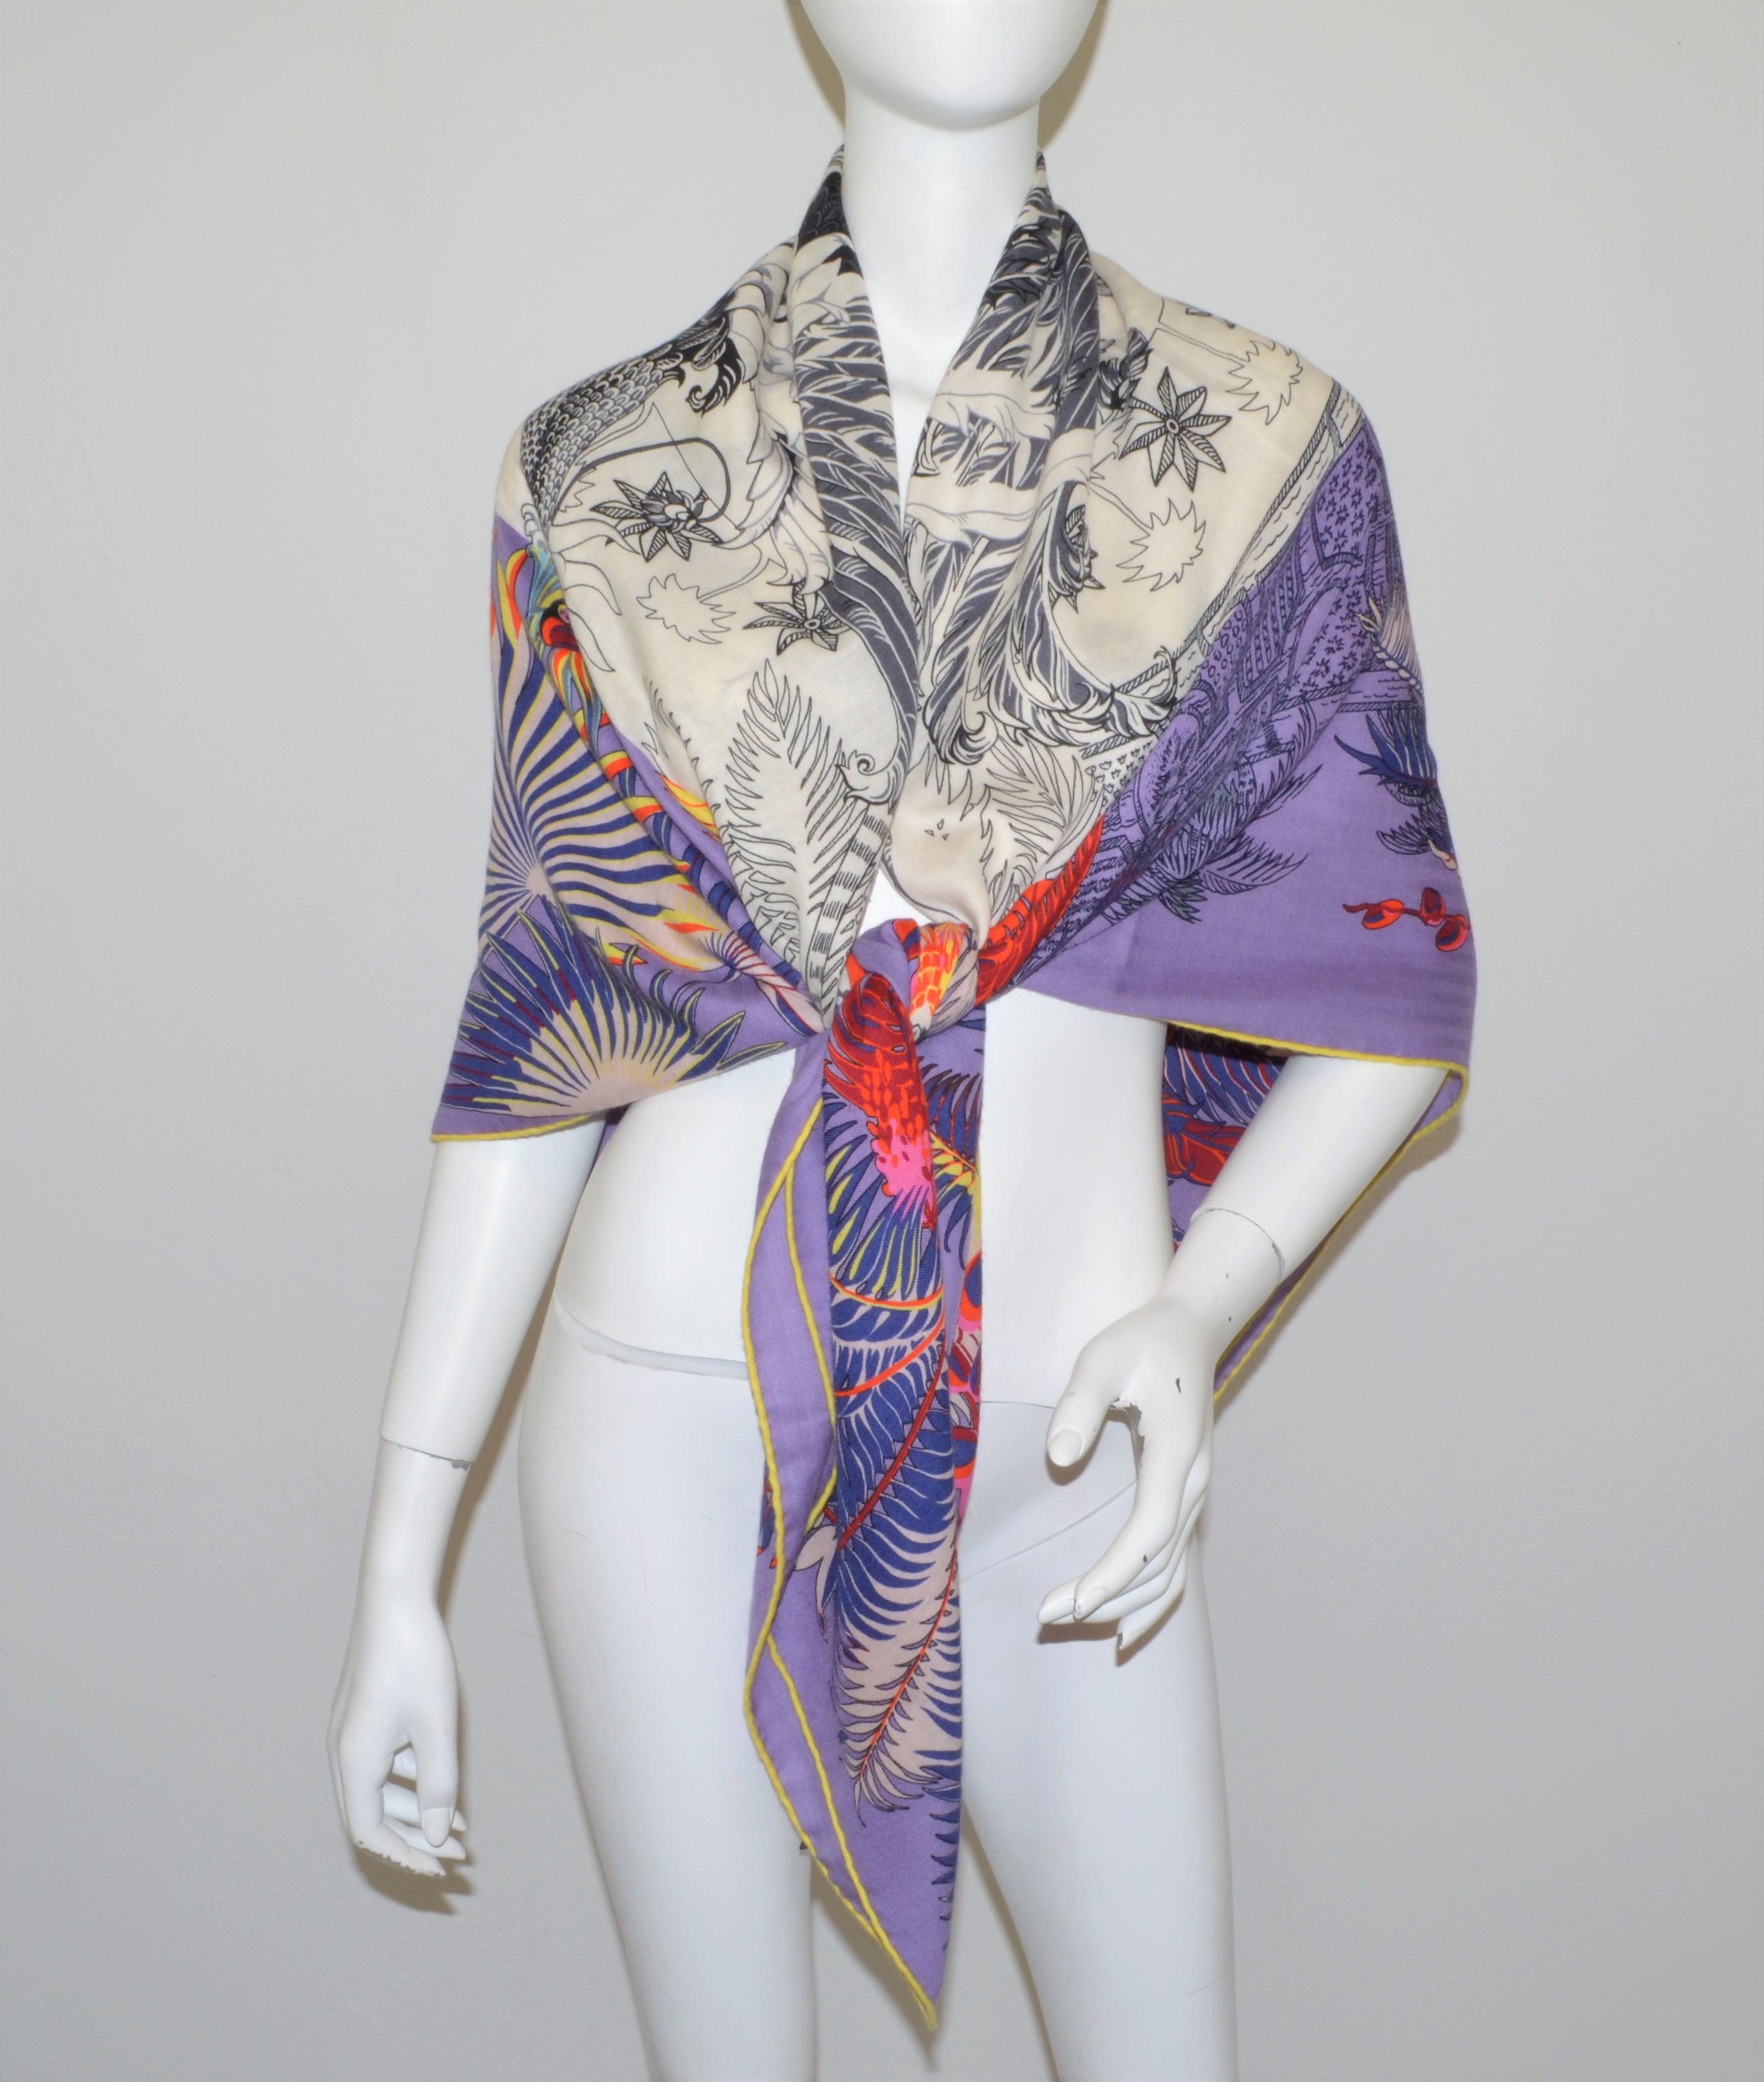 Hermes 140 cm Shawl Lavender Mythiques Phoenix by Laurence Bourthoumien -- Shawl in cashmere and silk (70% cashmere, 30% silk)

Designed by Laurence Bourthoumieux
Measures 55